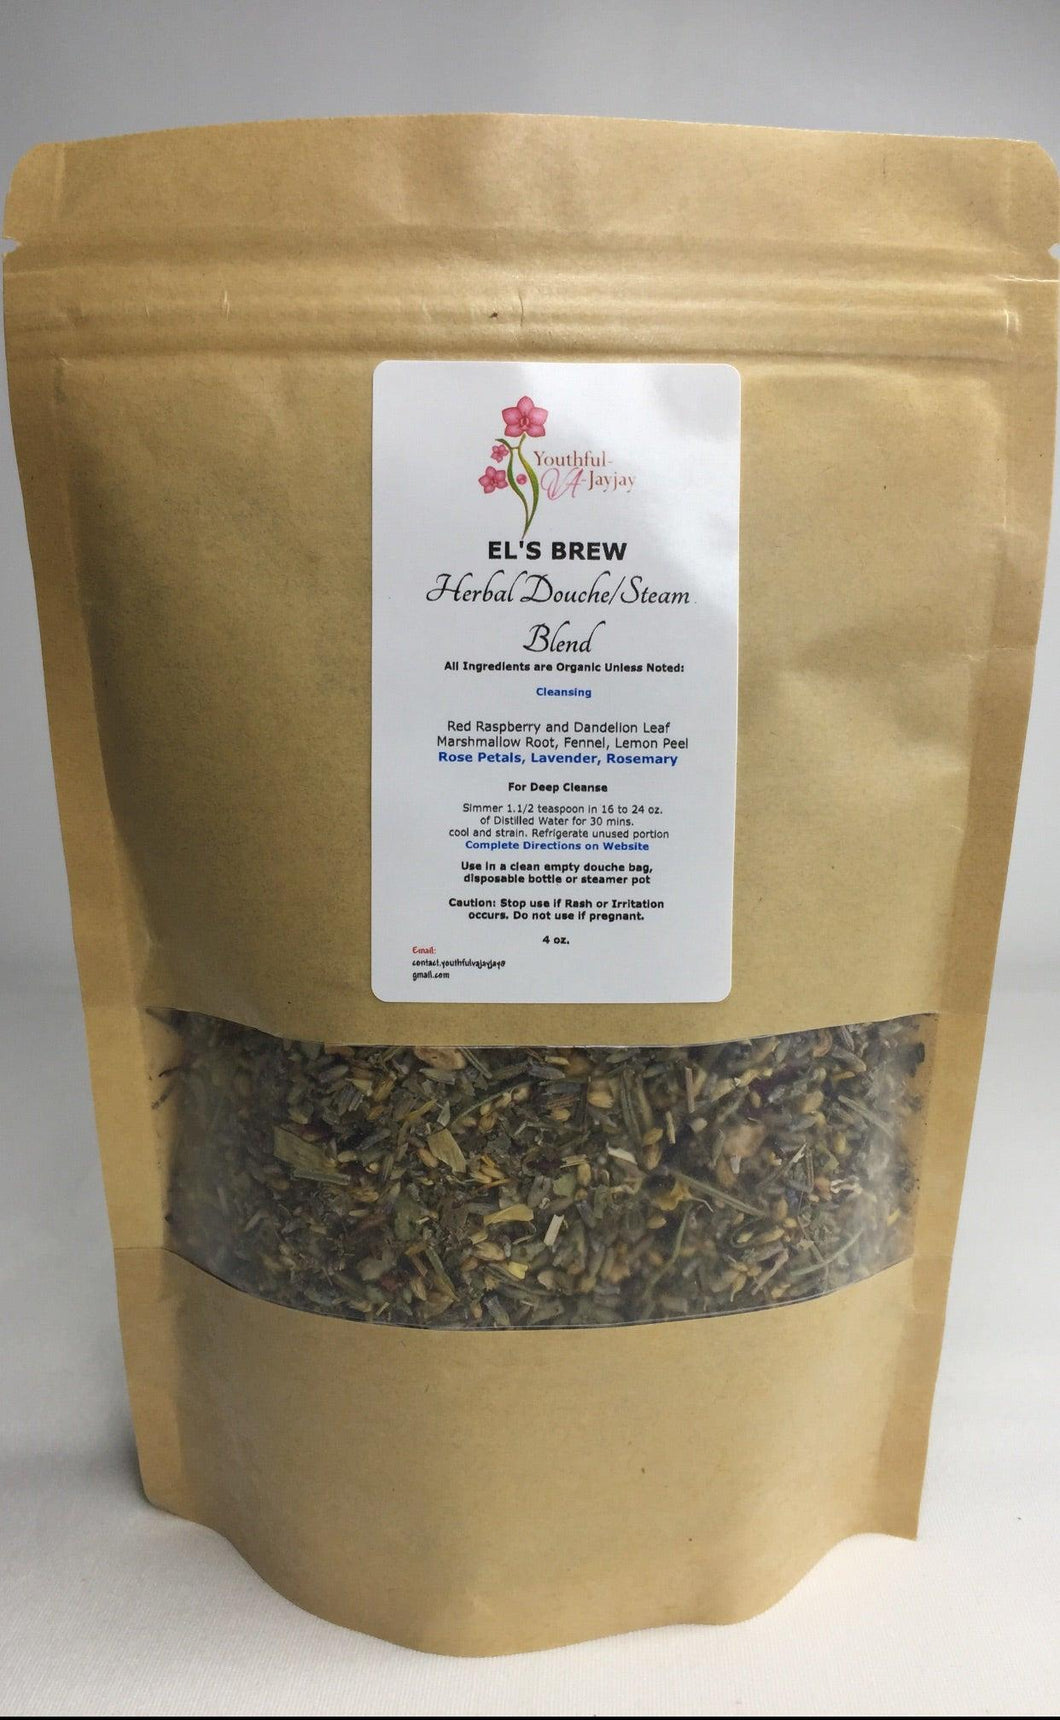 EL'S BREW- Organic Herbal Steam/Douche Blend, Handcrafted CLEANSING USE, 4oz. - Image #1